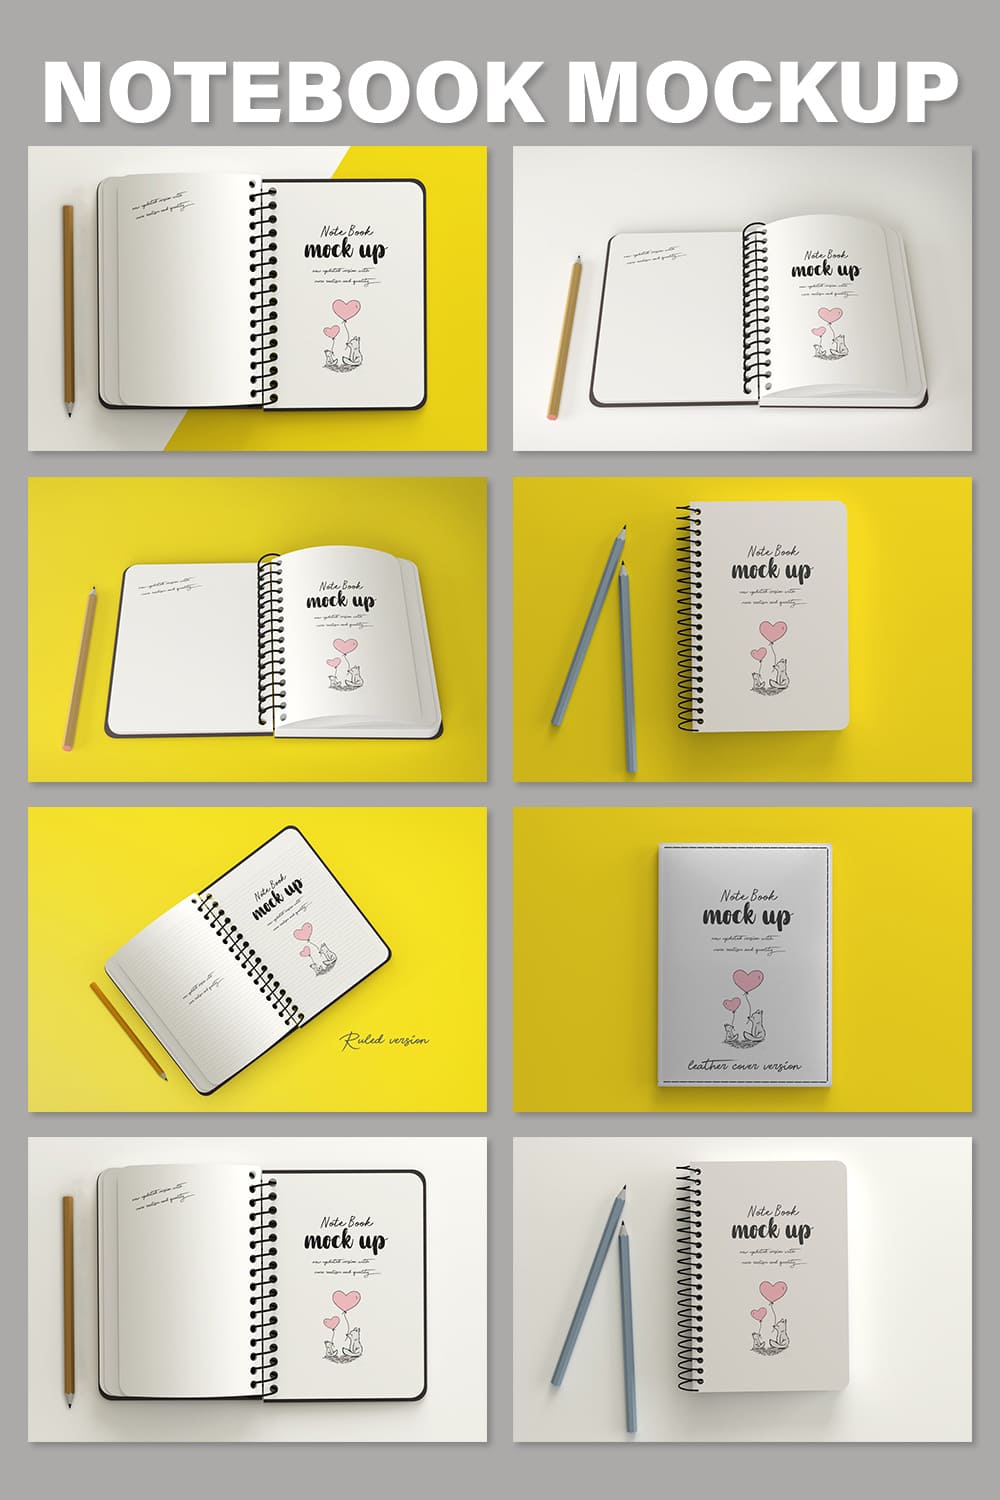 A set of images of notepads with a charming design.